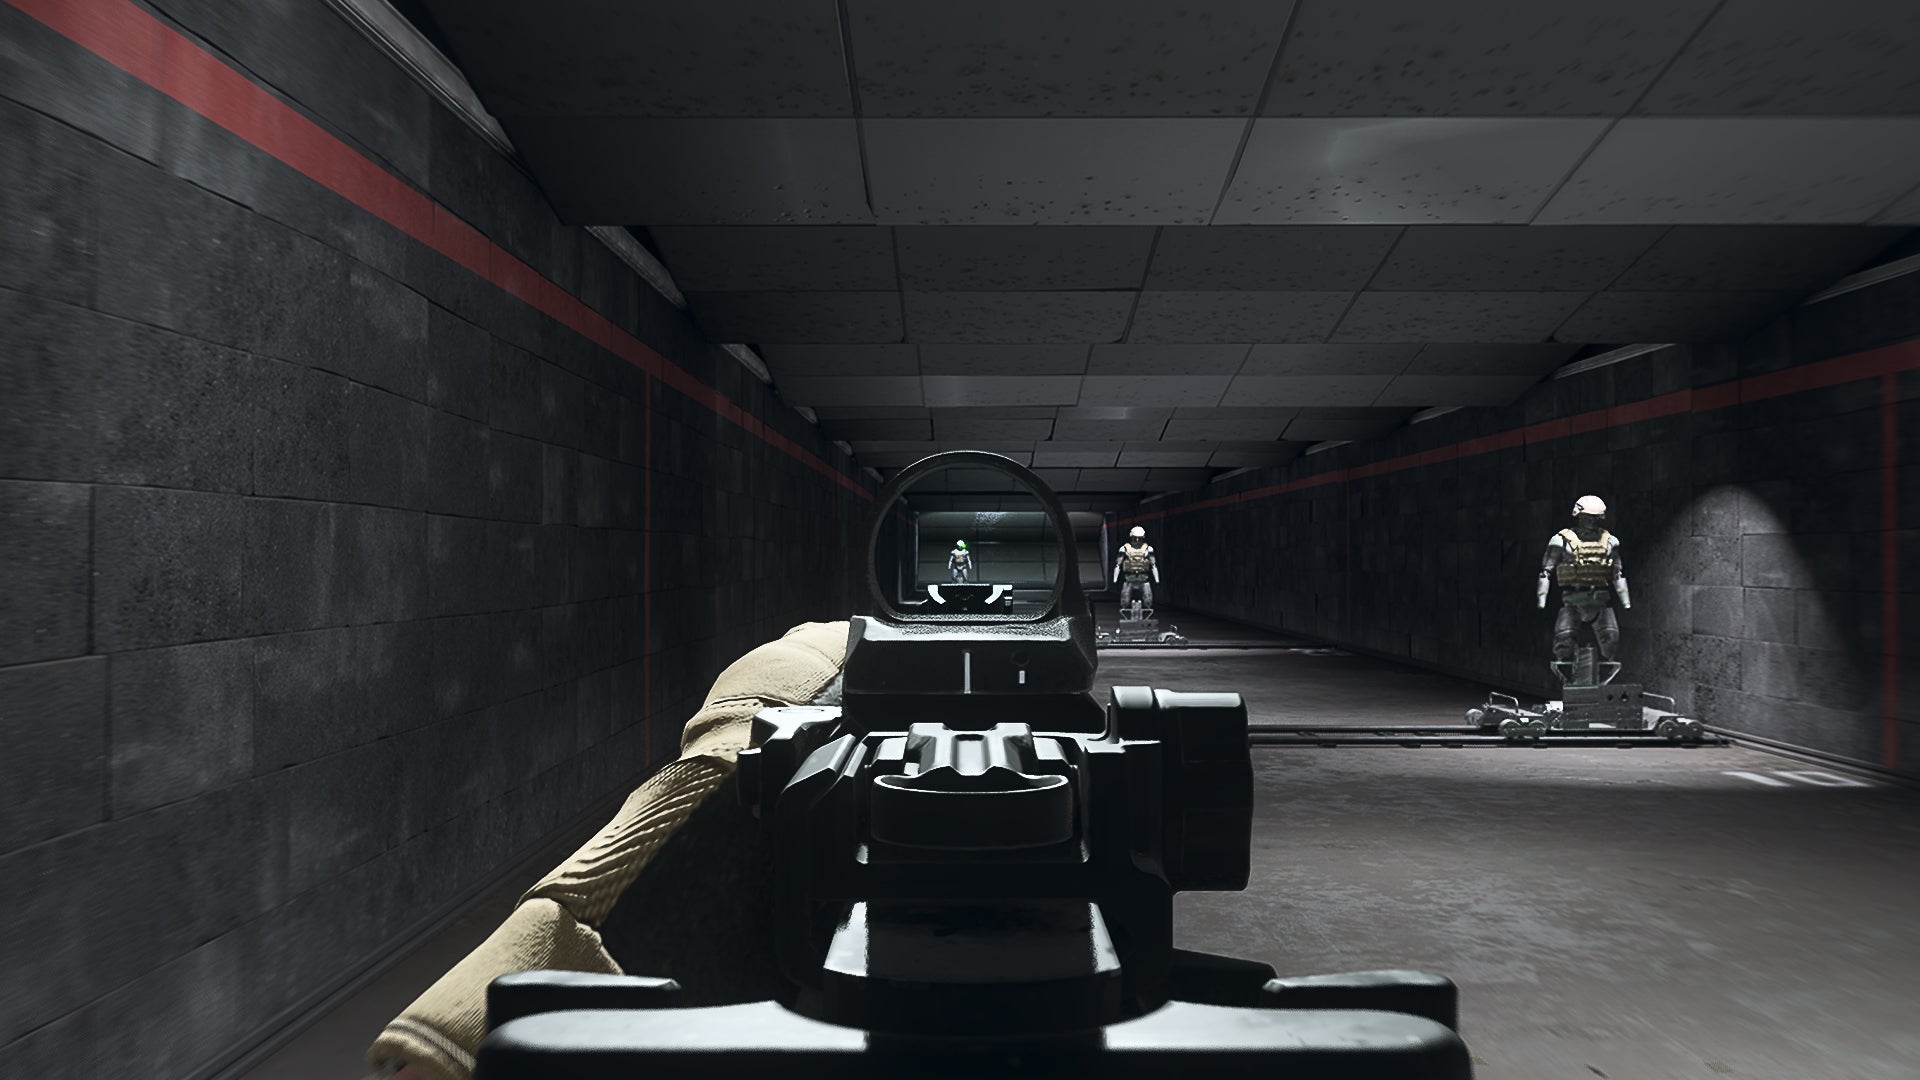 The player in Warzone 2.0 aims at a training dummy using the Cronen Mini Red Dot optic attachment.